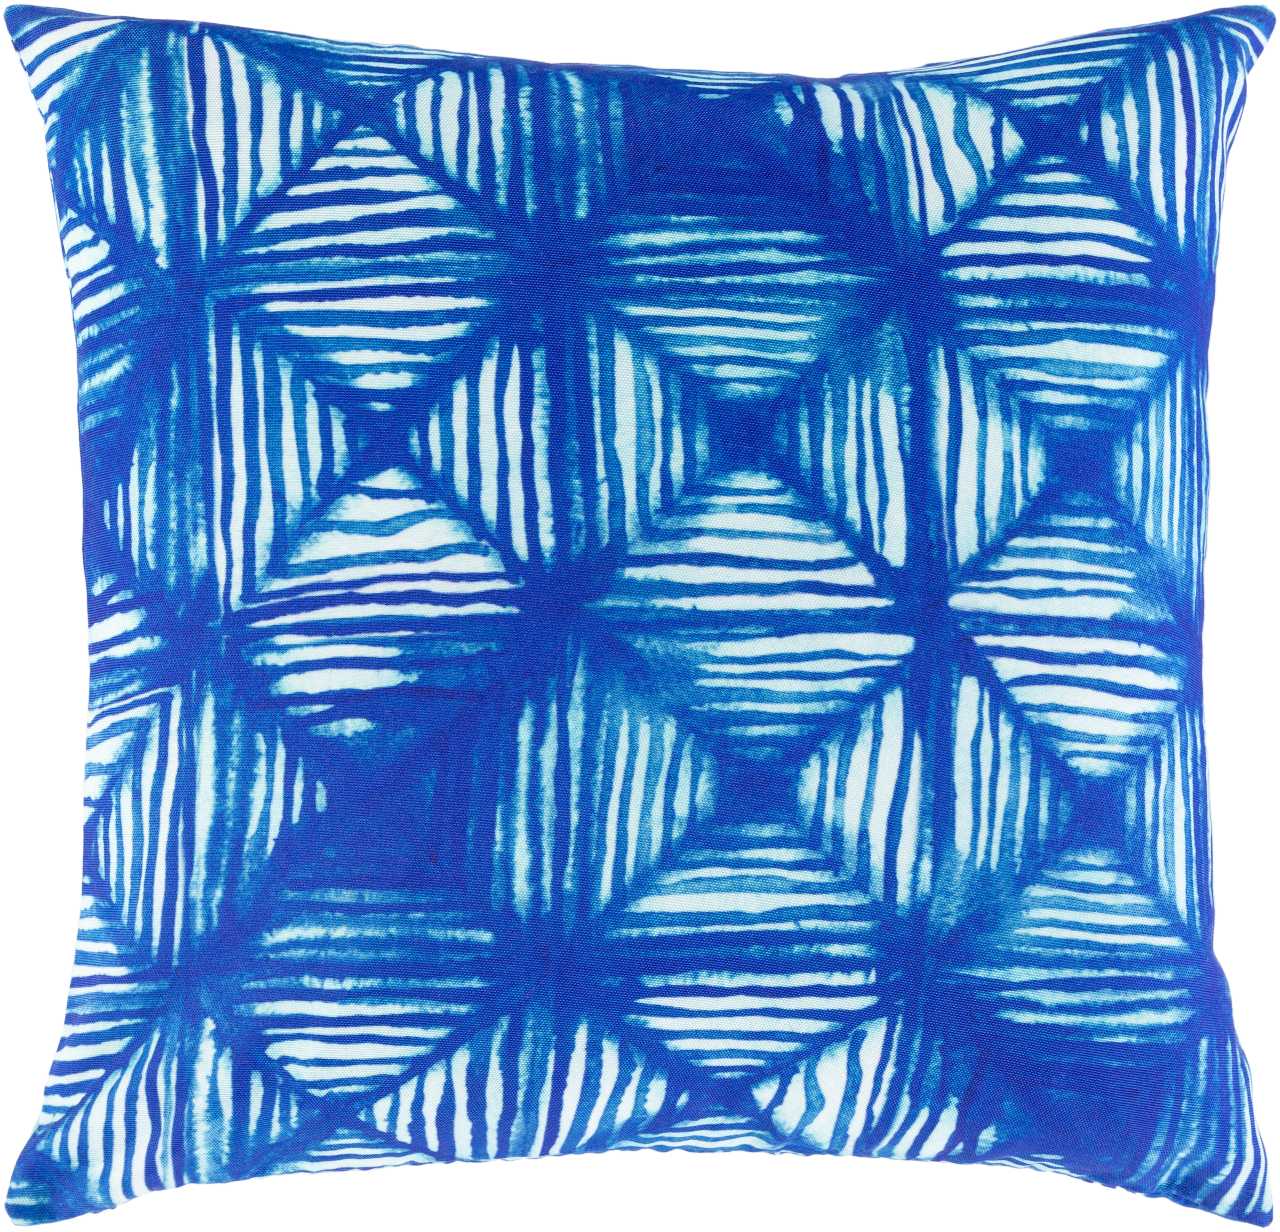 Jette Bright Blue Pillow Cover